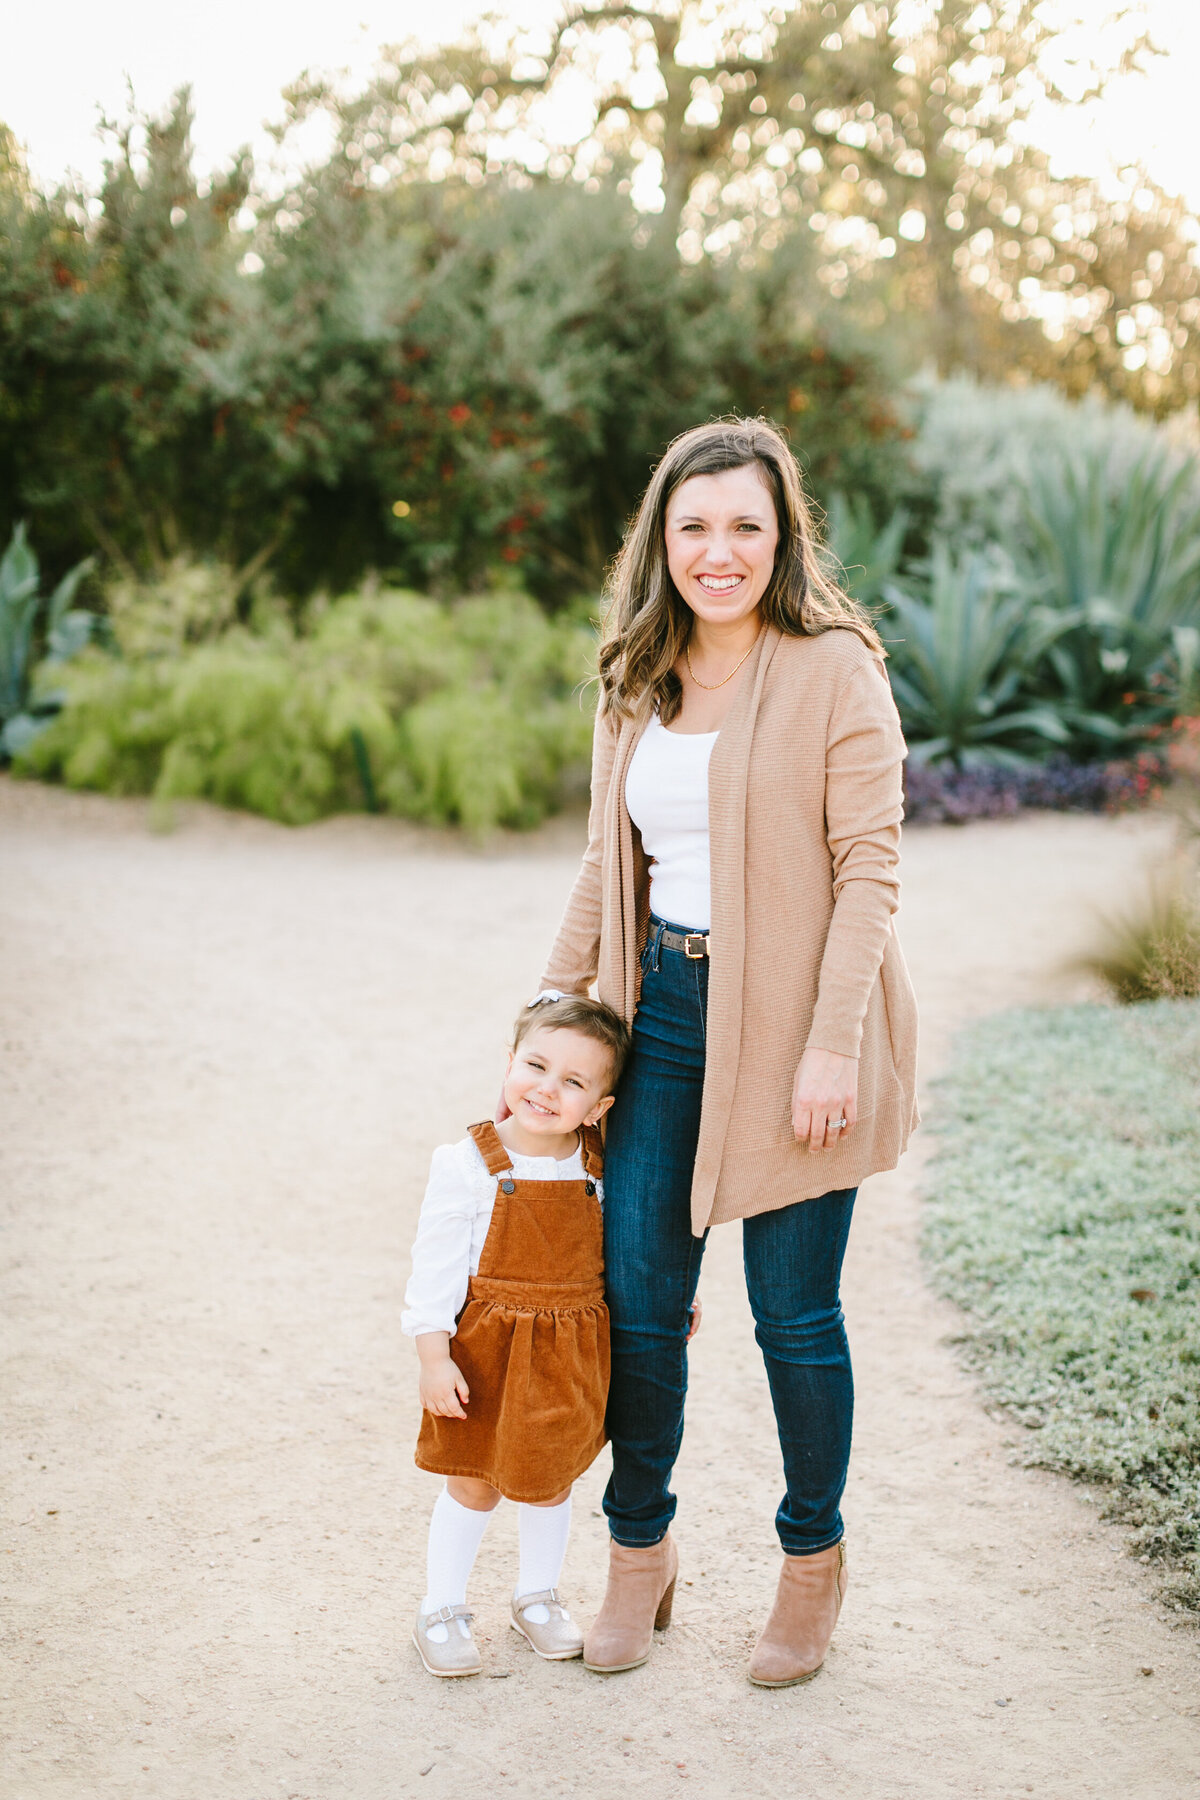 Best California and Texas Family Photographer-Jodee Debes Photography-216